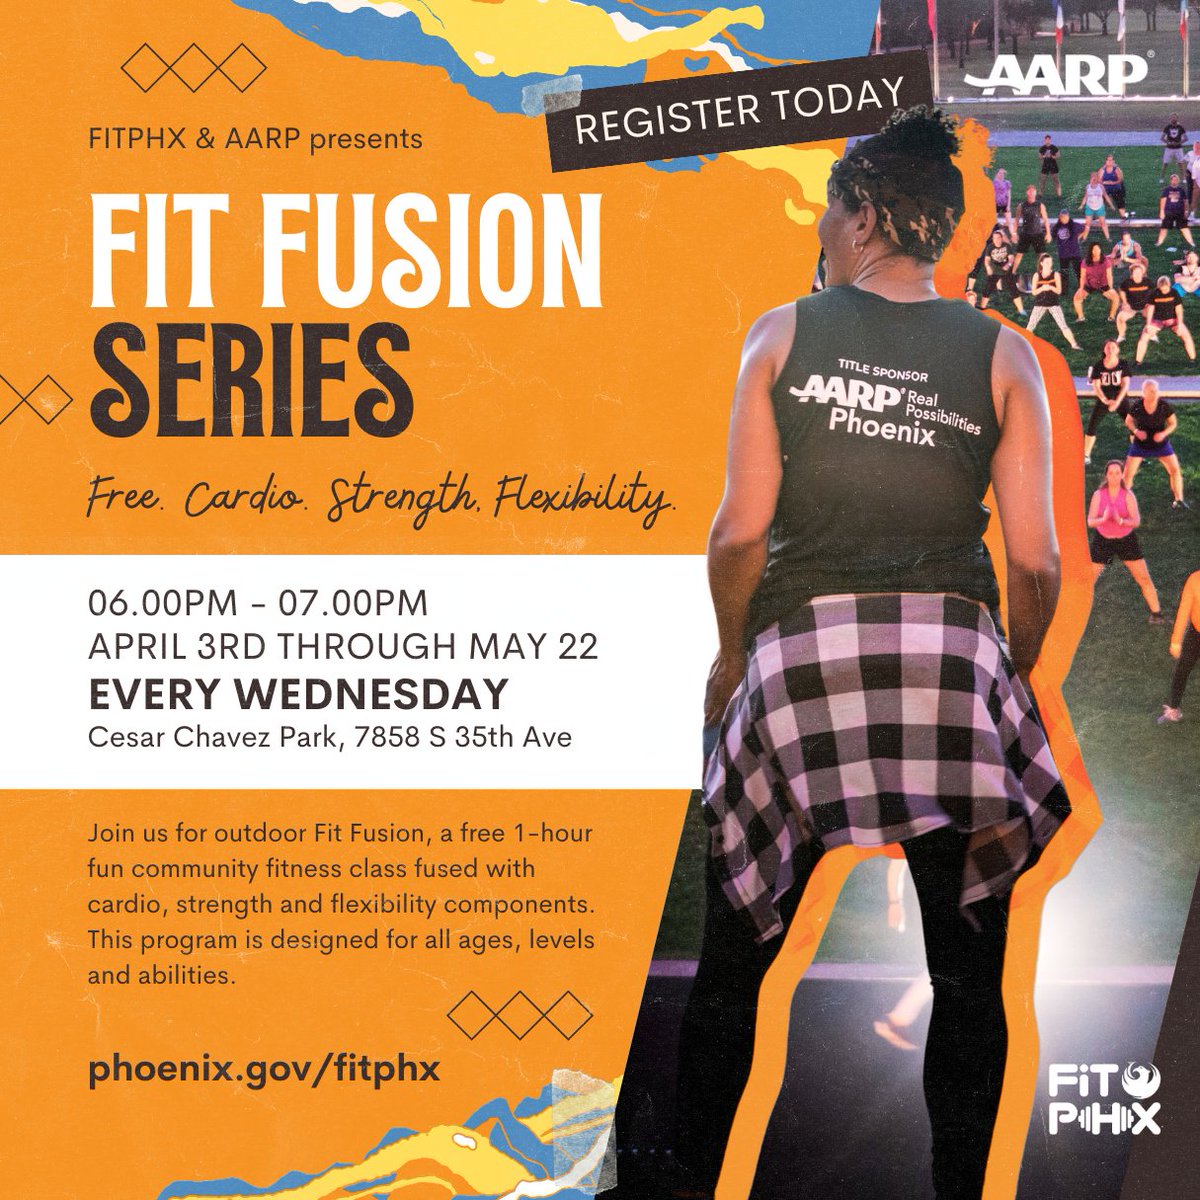 🏋🏽 A full hour of cardio, strength, and flexibility training, EVERY WEDNESDAY at CESAR CHAVEZ PARK. Our FREE Fit Fusion fitness classes welcome all levels & ages! 💪 Register online: phoenix.gov/fitphx 📍 7858 S 35th Ave 🗓️ EVERY WEDNESDAY, 6:00-7:00PM #fitphx #phxparks